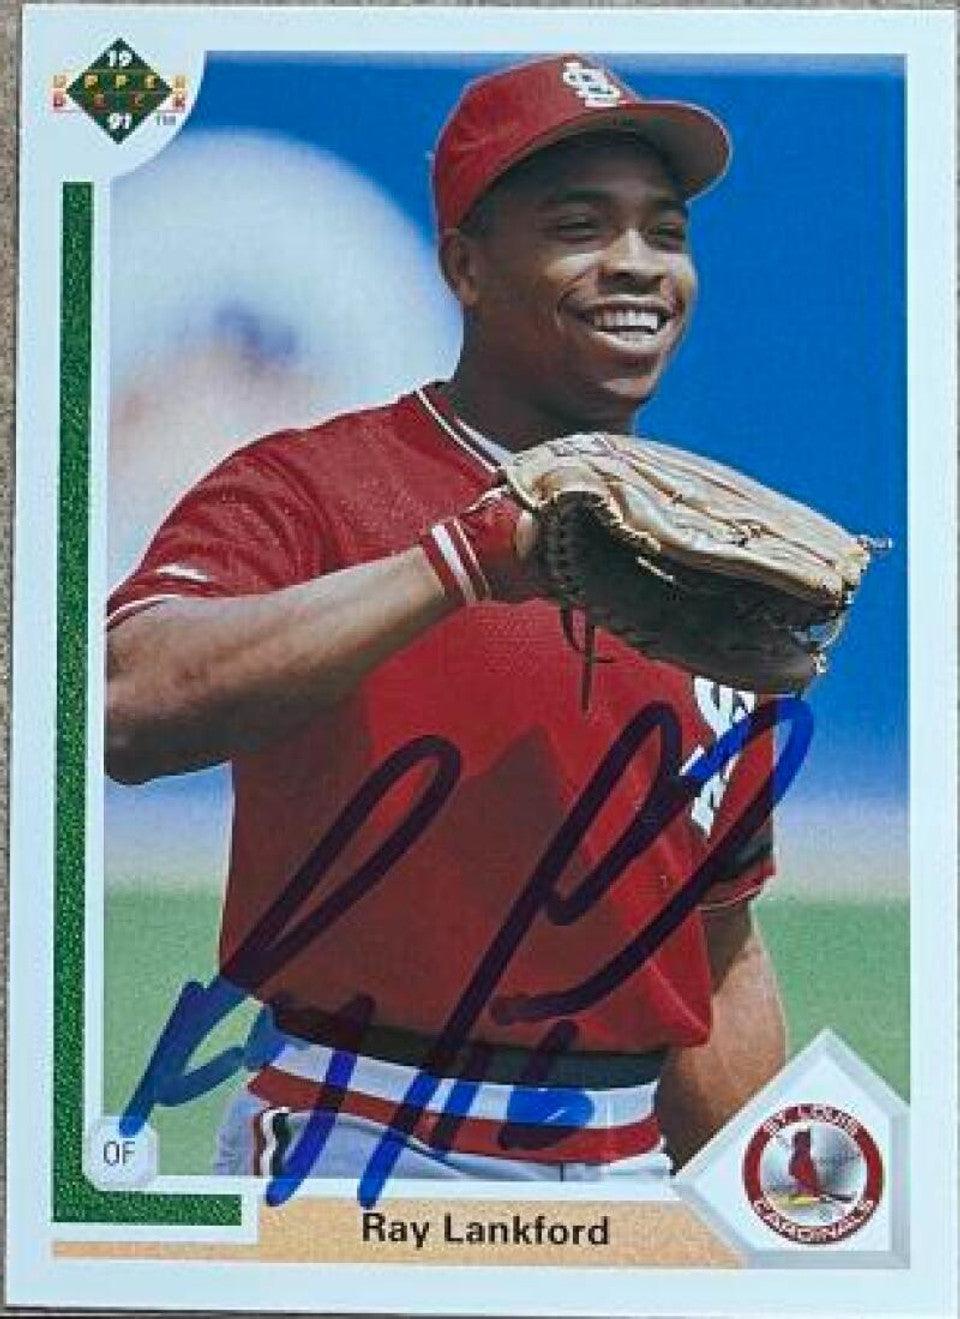 Ray Lankford Signed 1991 Upper Deck Baseball Card - St Louis Cardinals - PastPros